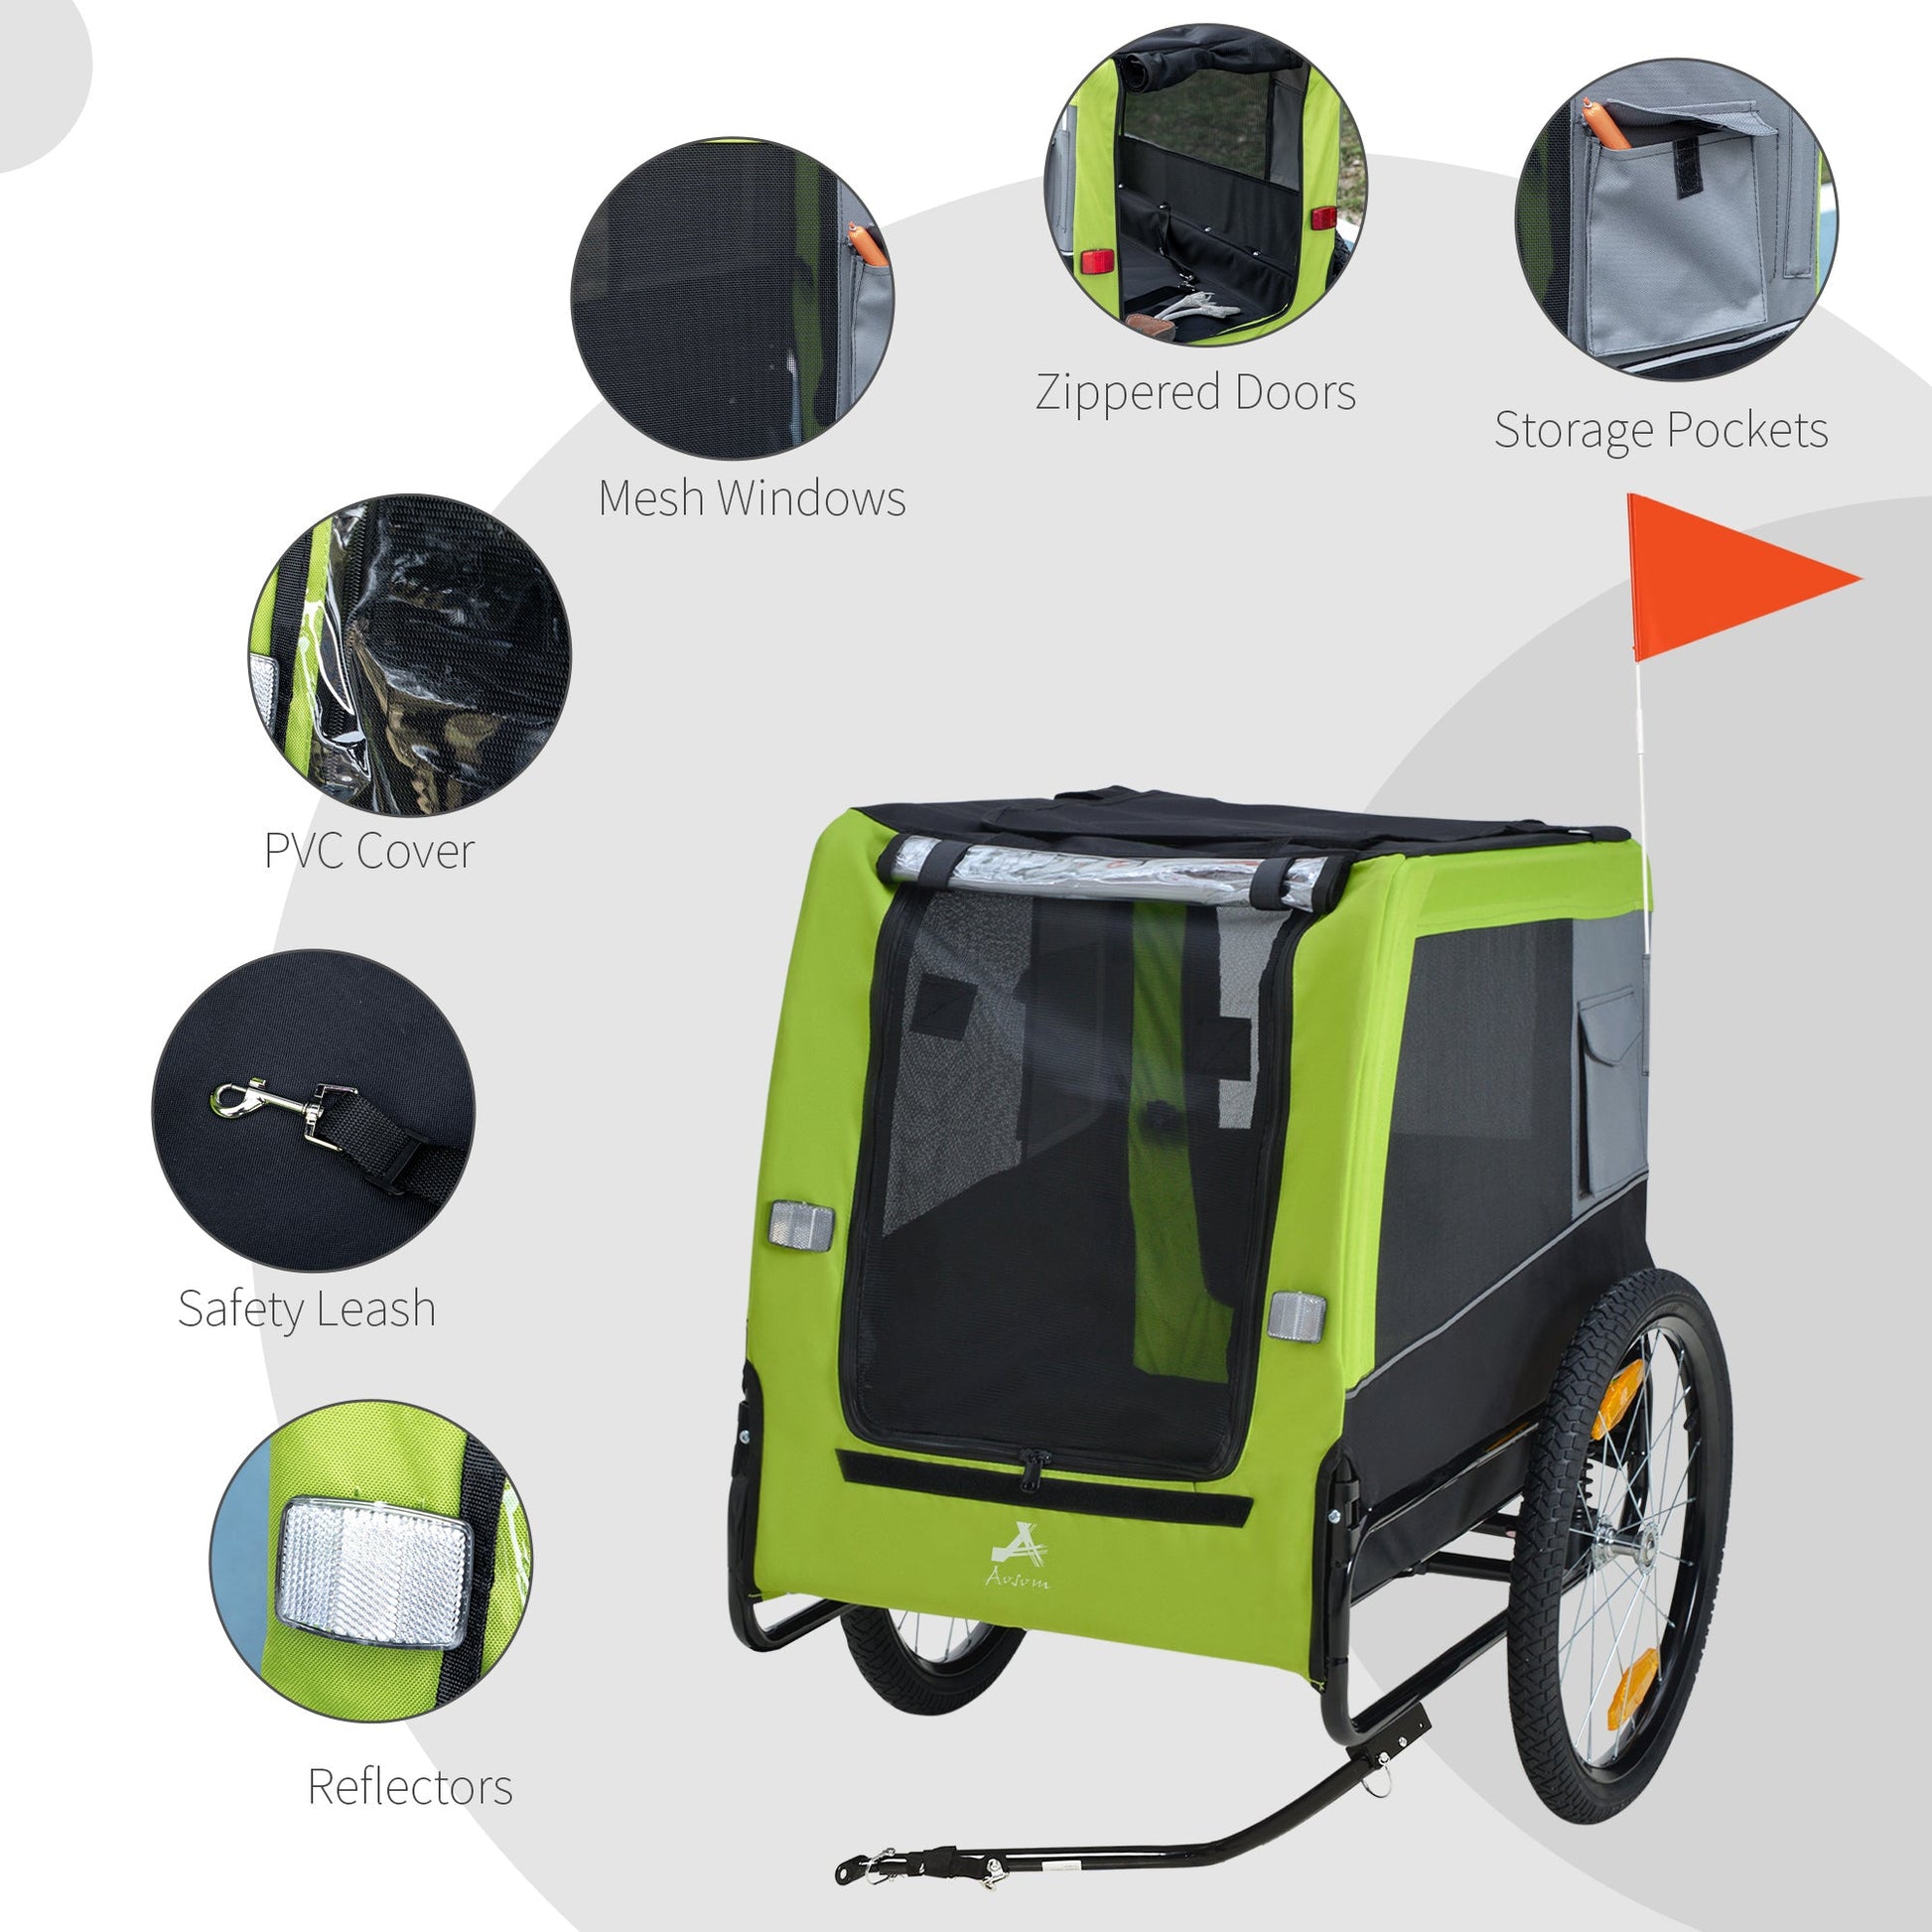 Dog Bike Trailer with Suspension System, Hitch, Pet Bicycle Trailer for Medium Dogs with 20" Wheels, Storage Pockets, Safey Leash, Reflectors, Flag, Green at Gallery Canada